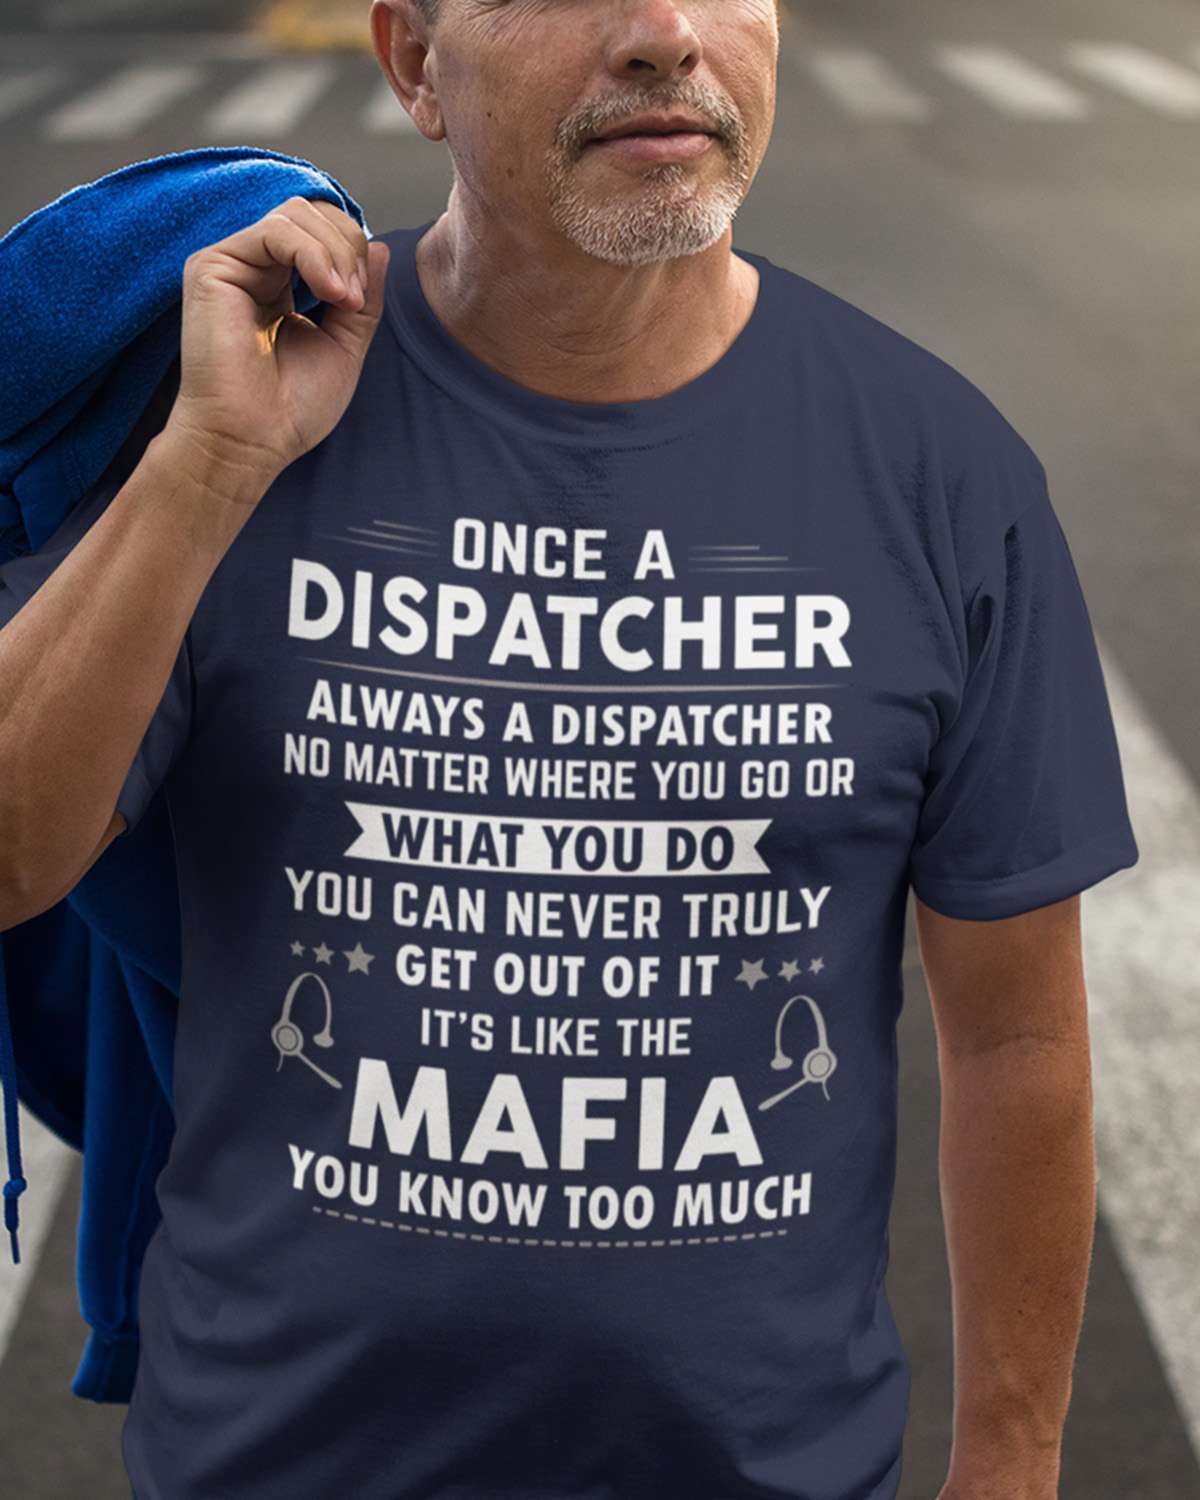 Once a dispatcher always a dispatcher no matter where you go or what you do it's like the mafia you know too much